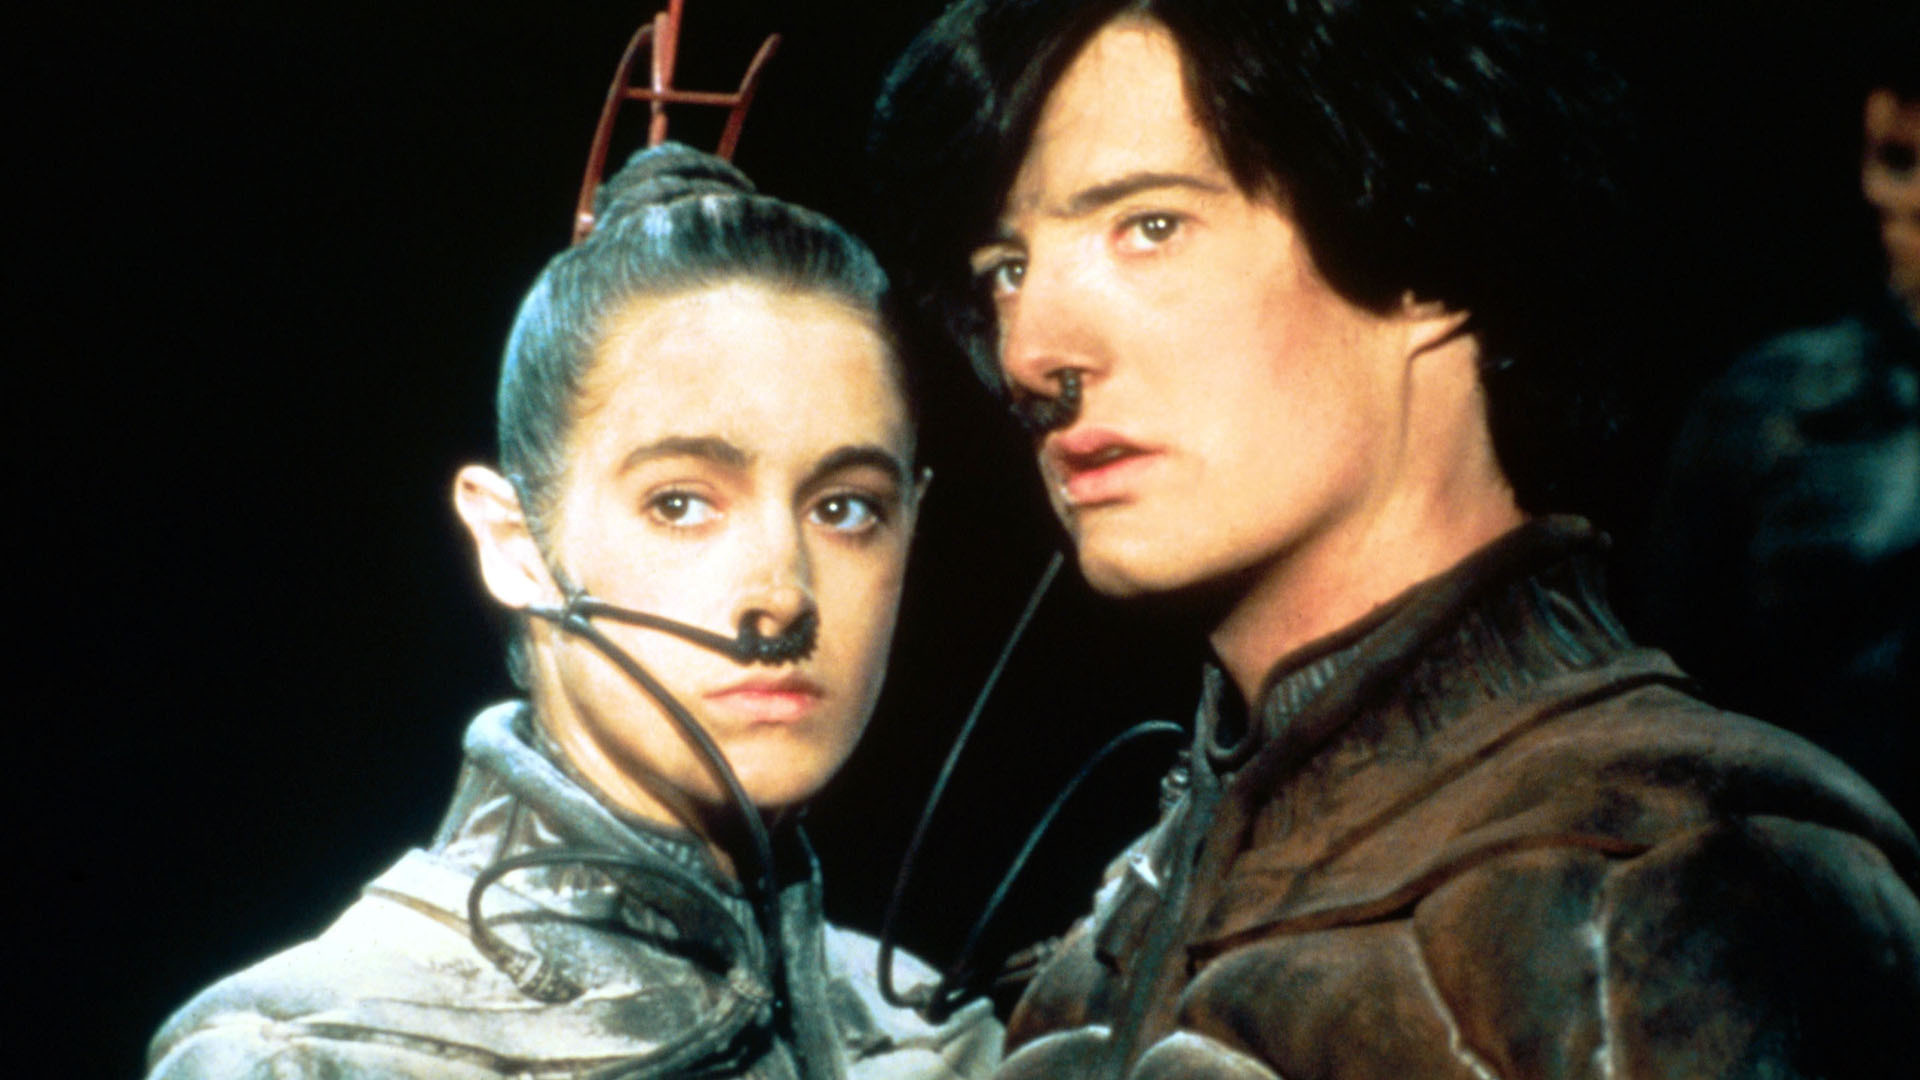 1920x1080 Frank Herbert's Dune by David Lynch with Kyle MacLachlan, Sean Young,  Sting, Patrick